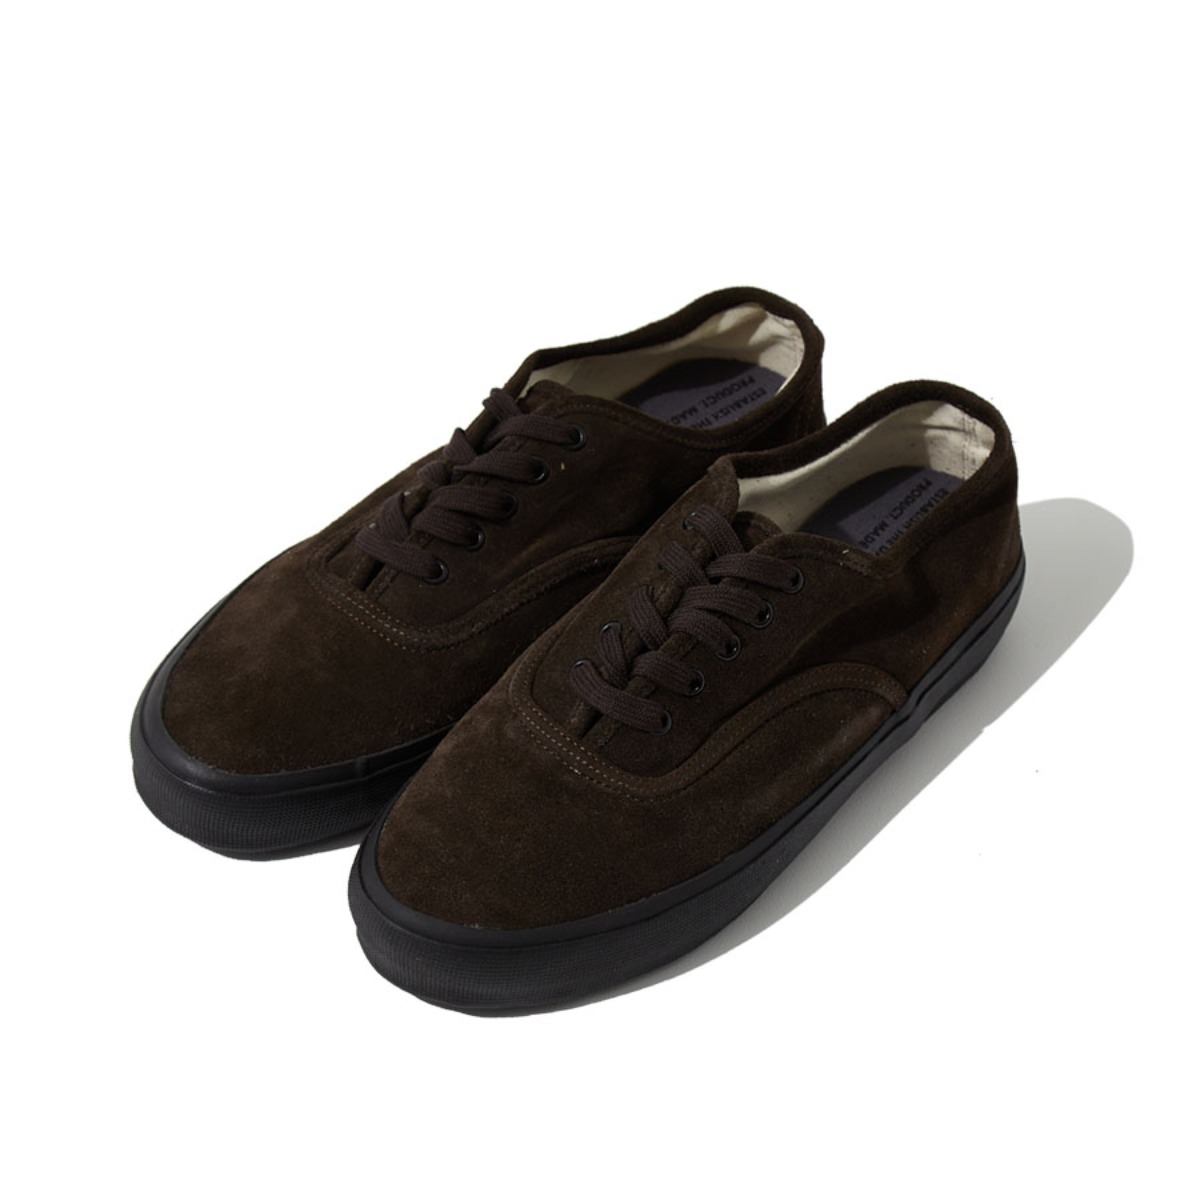 US NAVY MILITARY TRAINER 5851C (BROWN SUEDE)